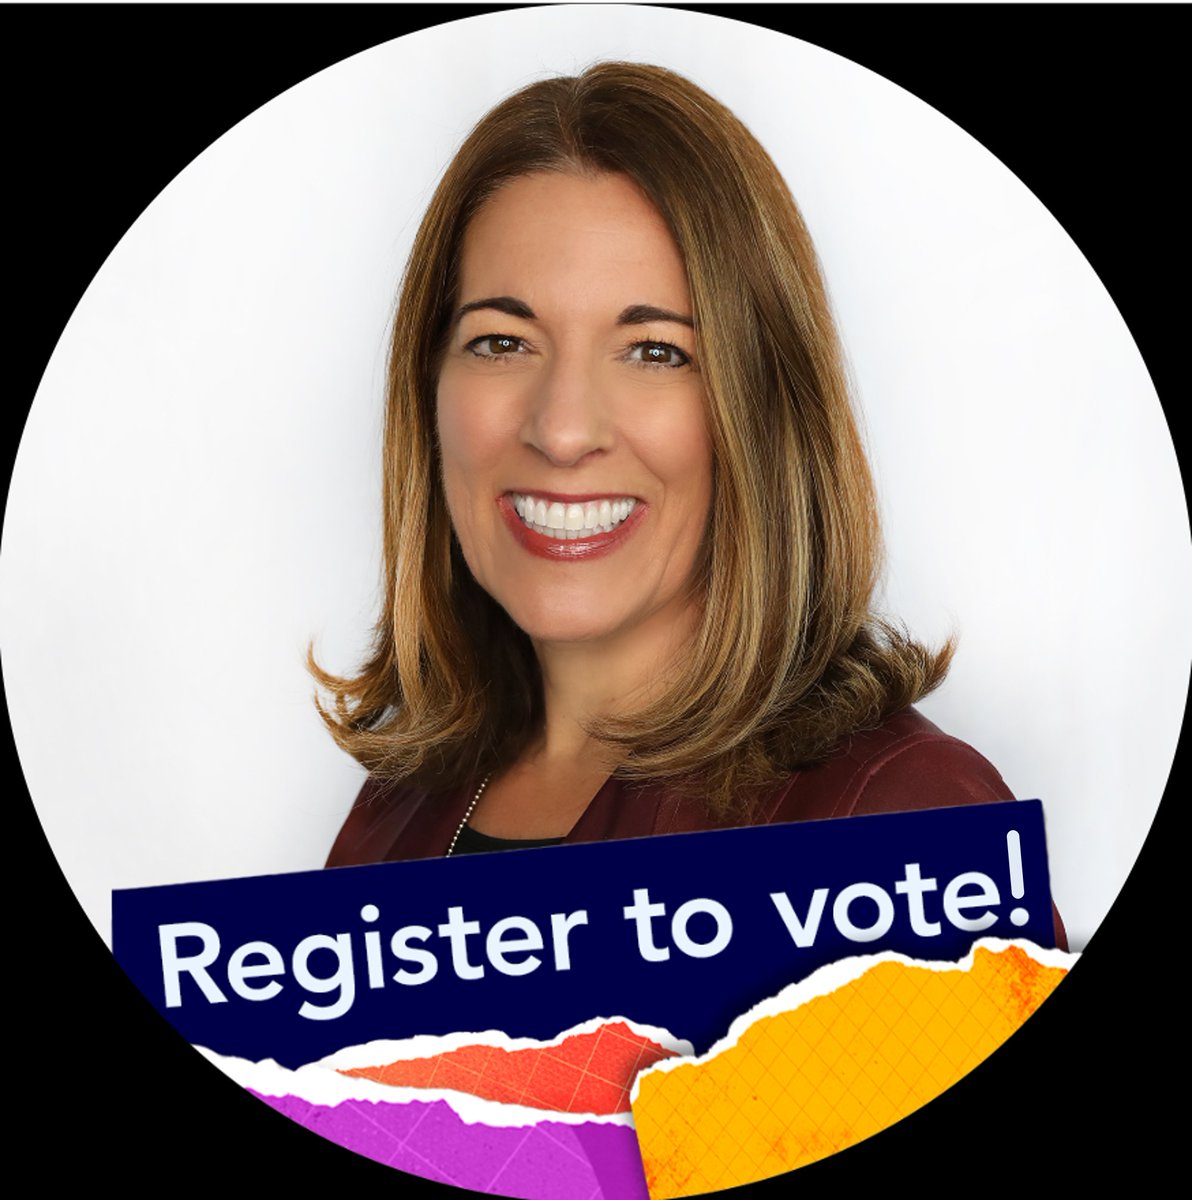 Join me in celebrating #NationalVoterRegistrationDay by registering to vote, checking your registration status, or signing up for election reminders! @Microsoft teamed up with @demworksinc to empower every person in the U.S. to vote, no matter what. msft.it/6013j4D5t